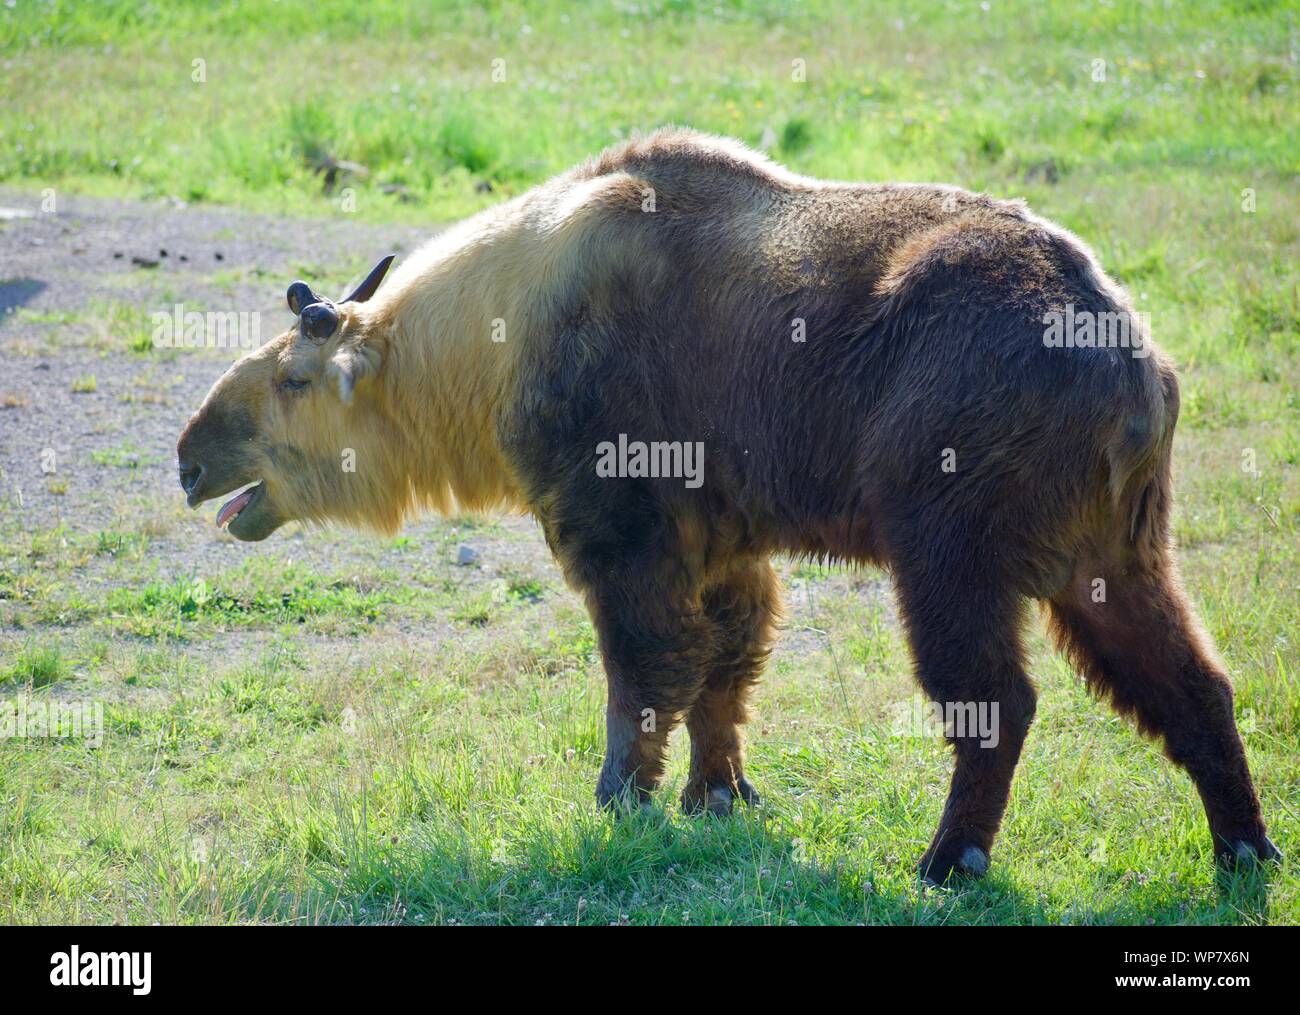 Sichuan Takin Isolated in Field. Budorcas taxicolor tibetana is a Sheep or Goat-like mammal from western china. Species is endangered an conservation Stock Photo